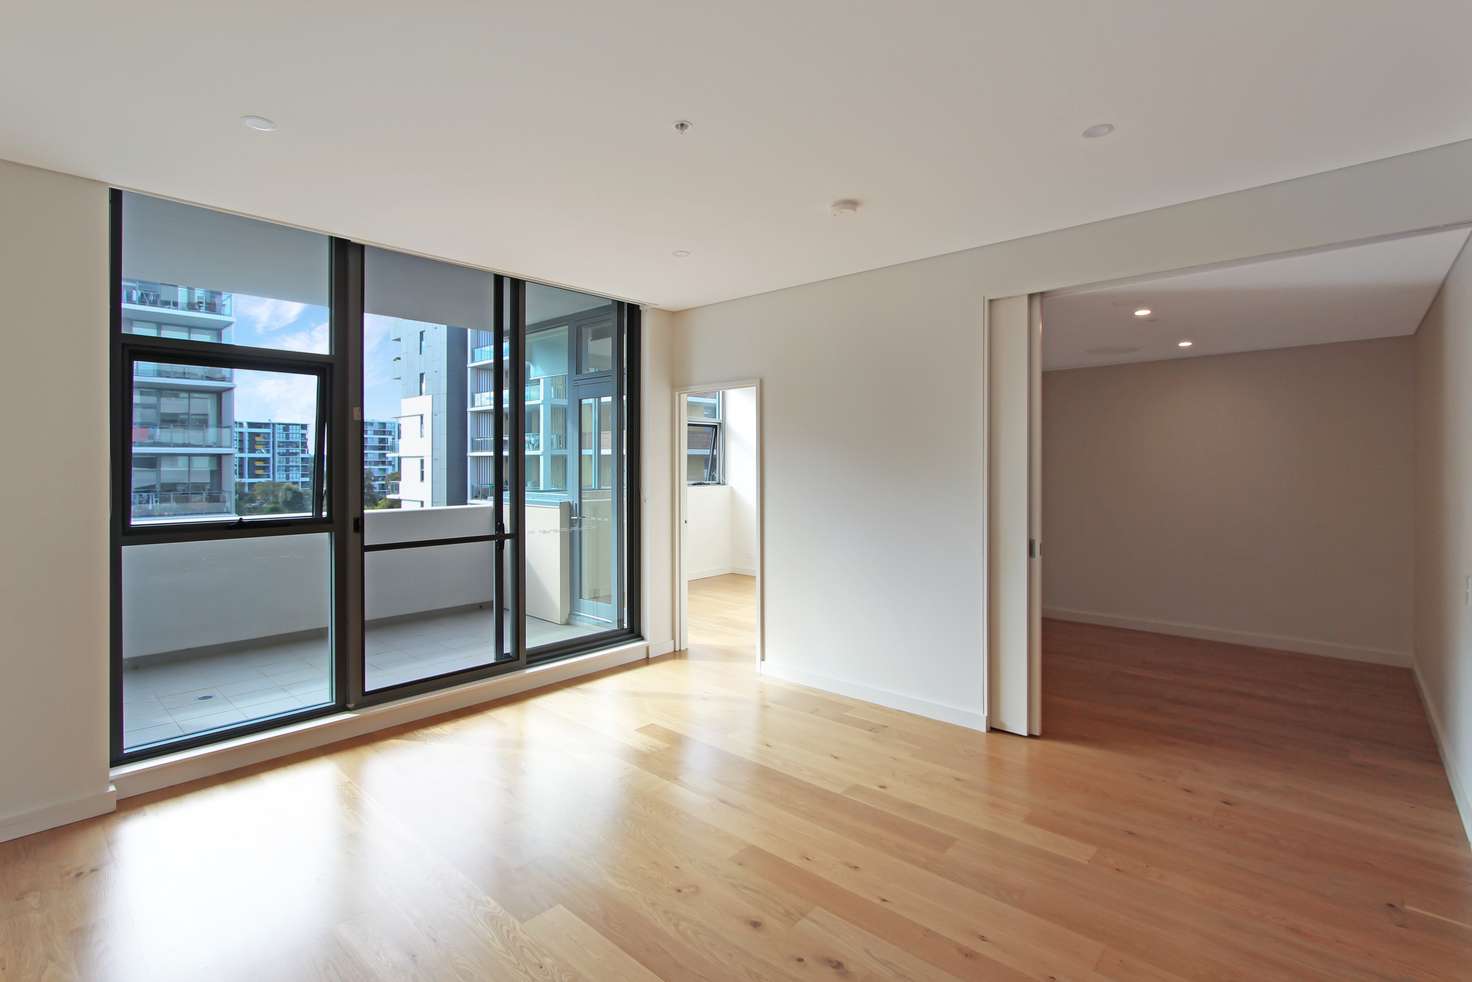 Main view of Homely apartment listing, 708/7 Mooltan Avenue, Macquarie Park NSW 2113